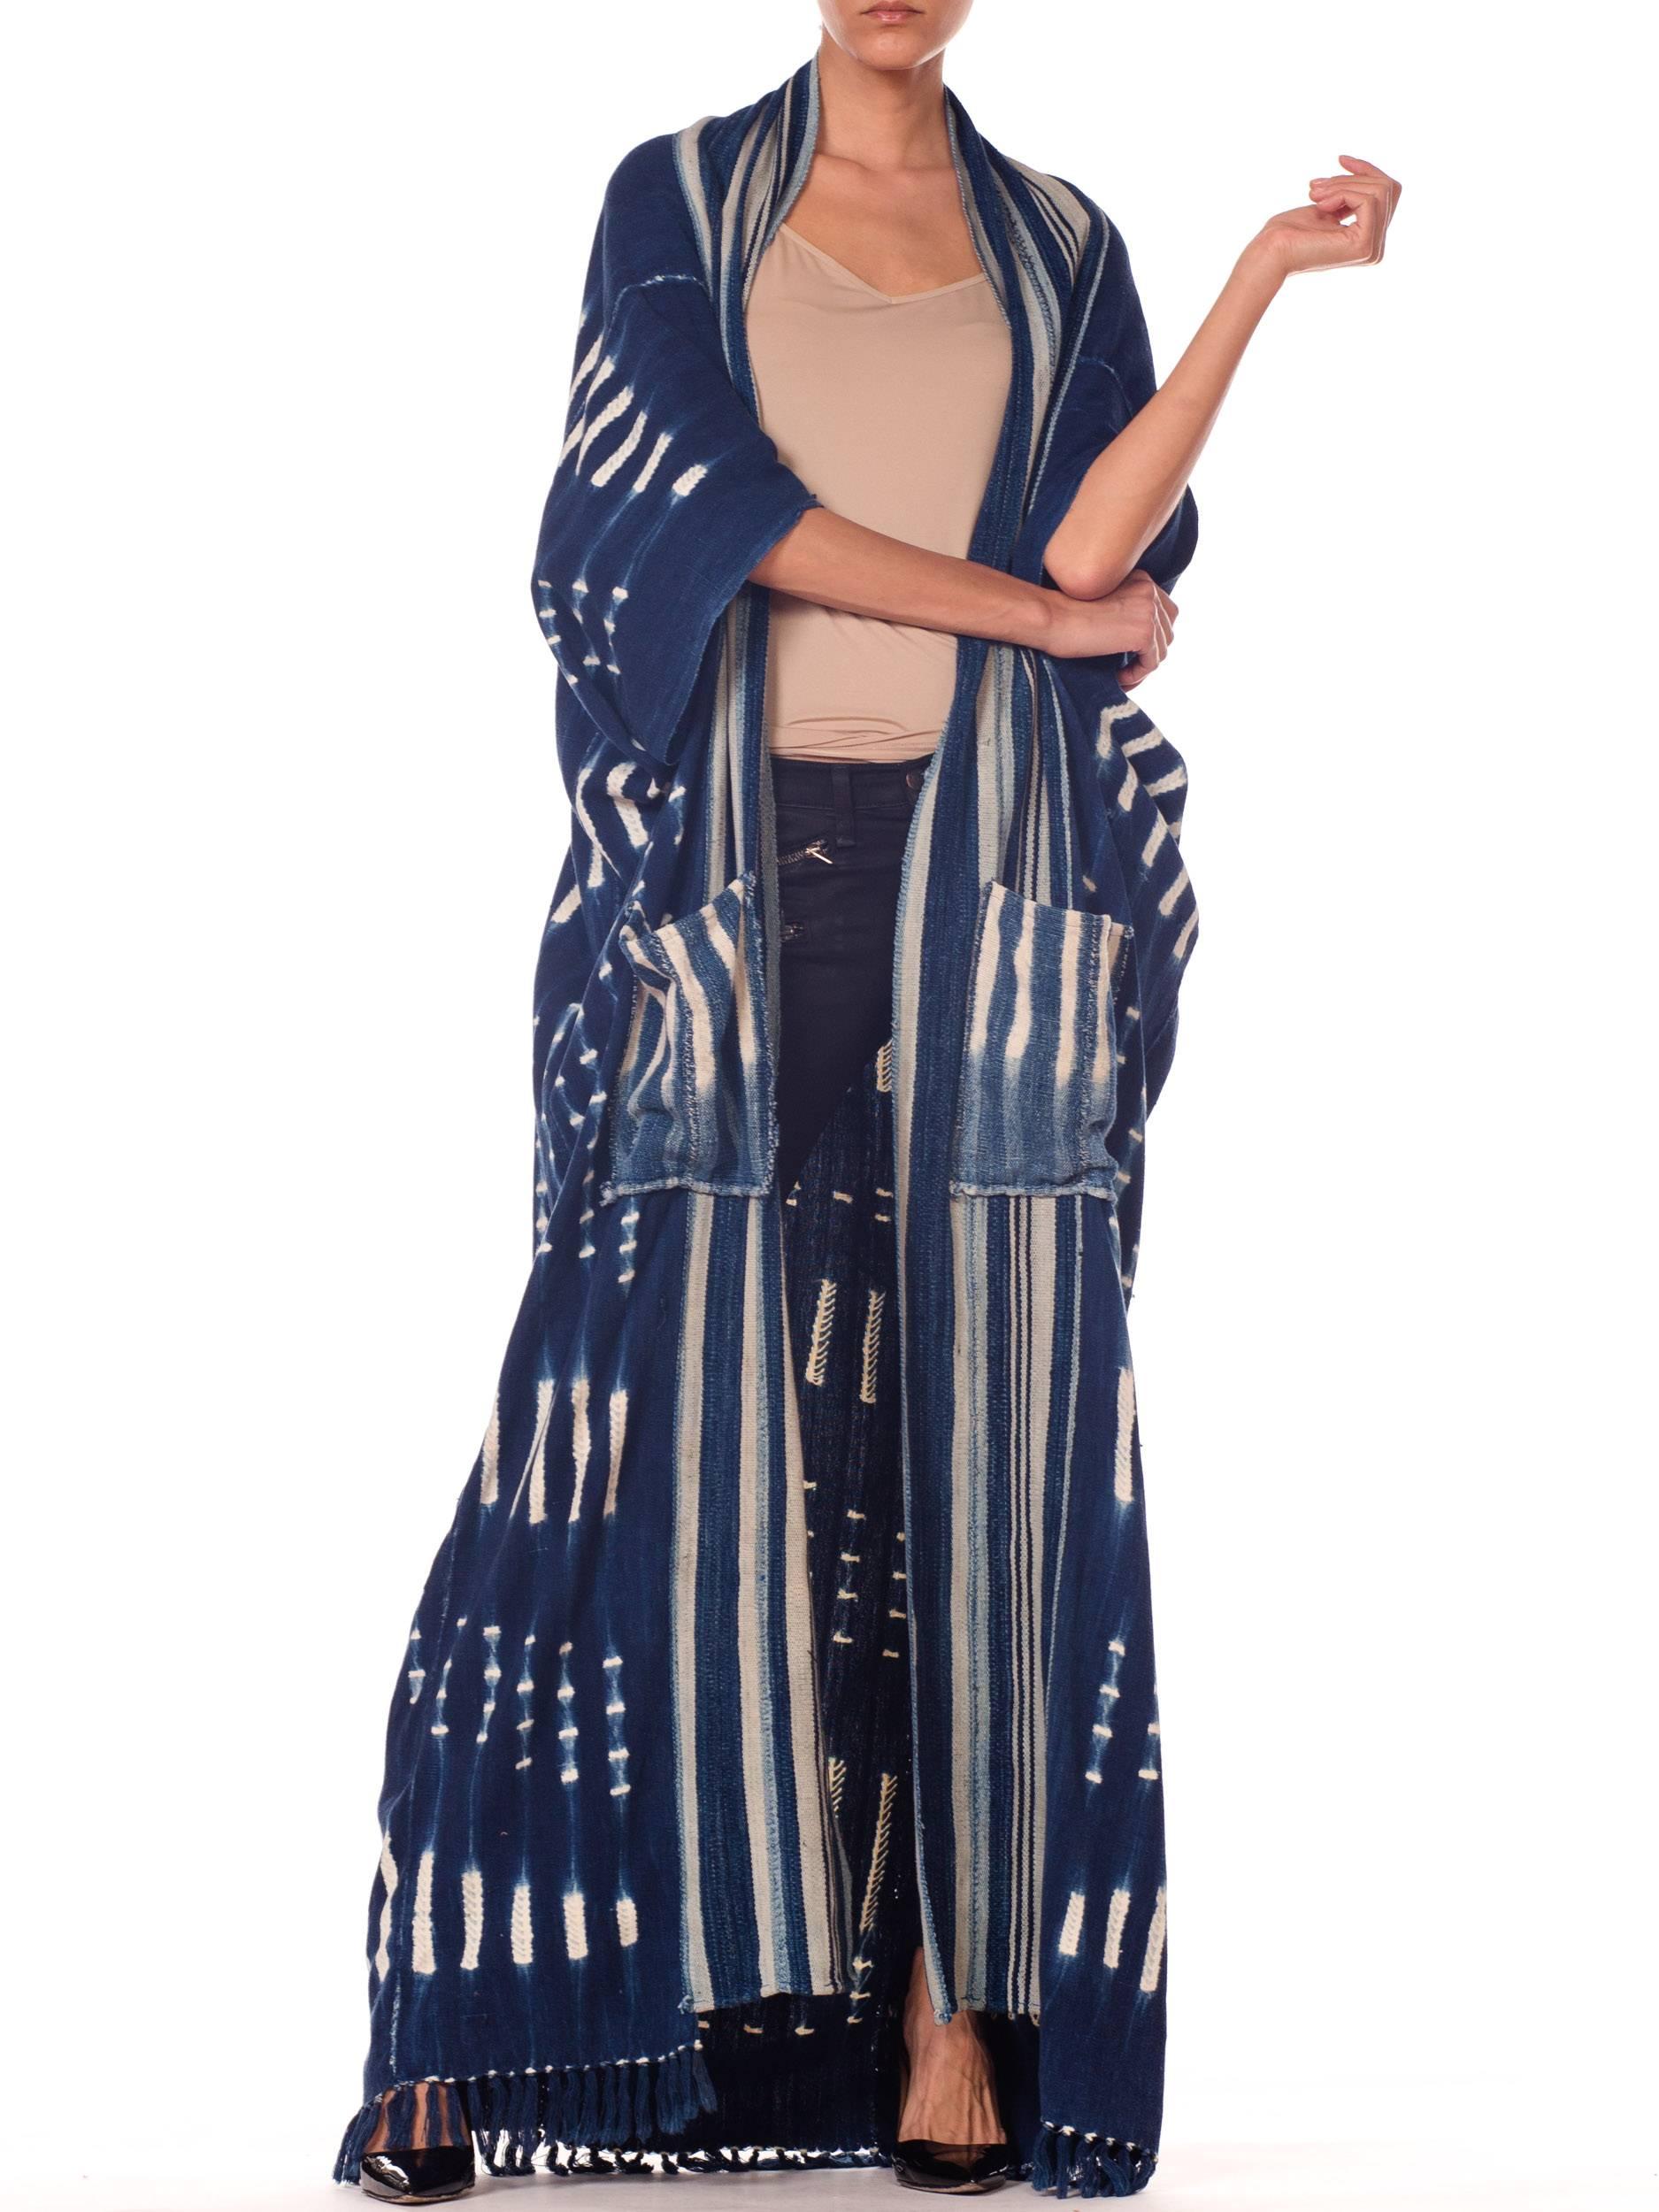 Morphew Collection African Handwoven Tie-dye Indigo Robe with Striped Collar 5